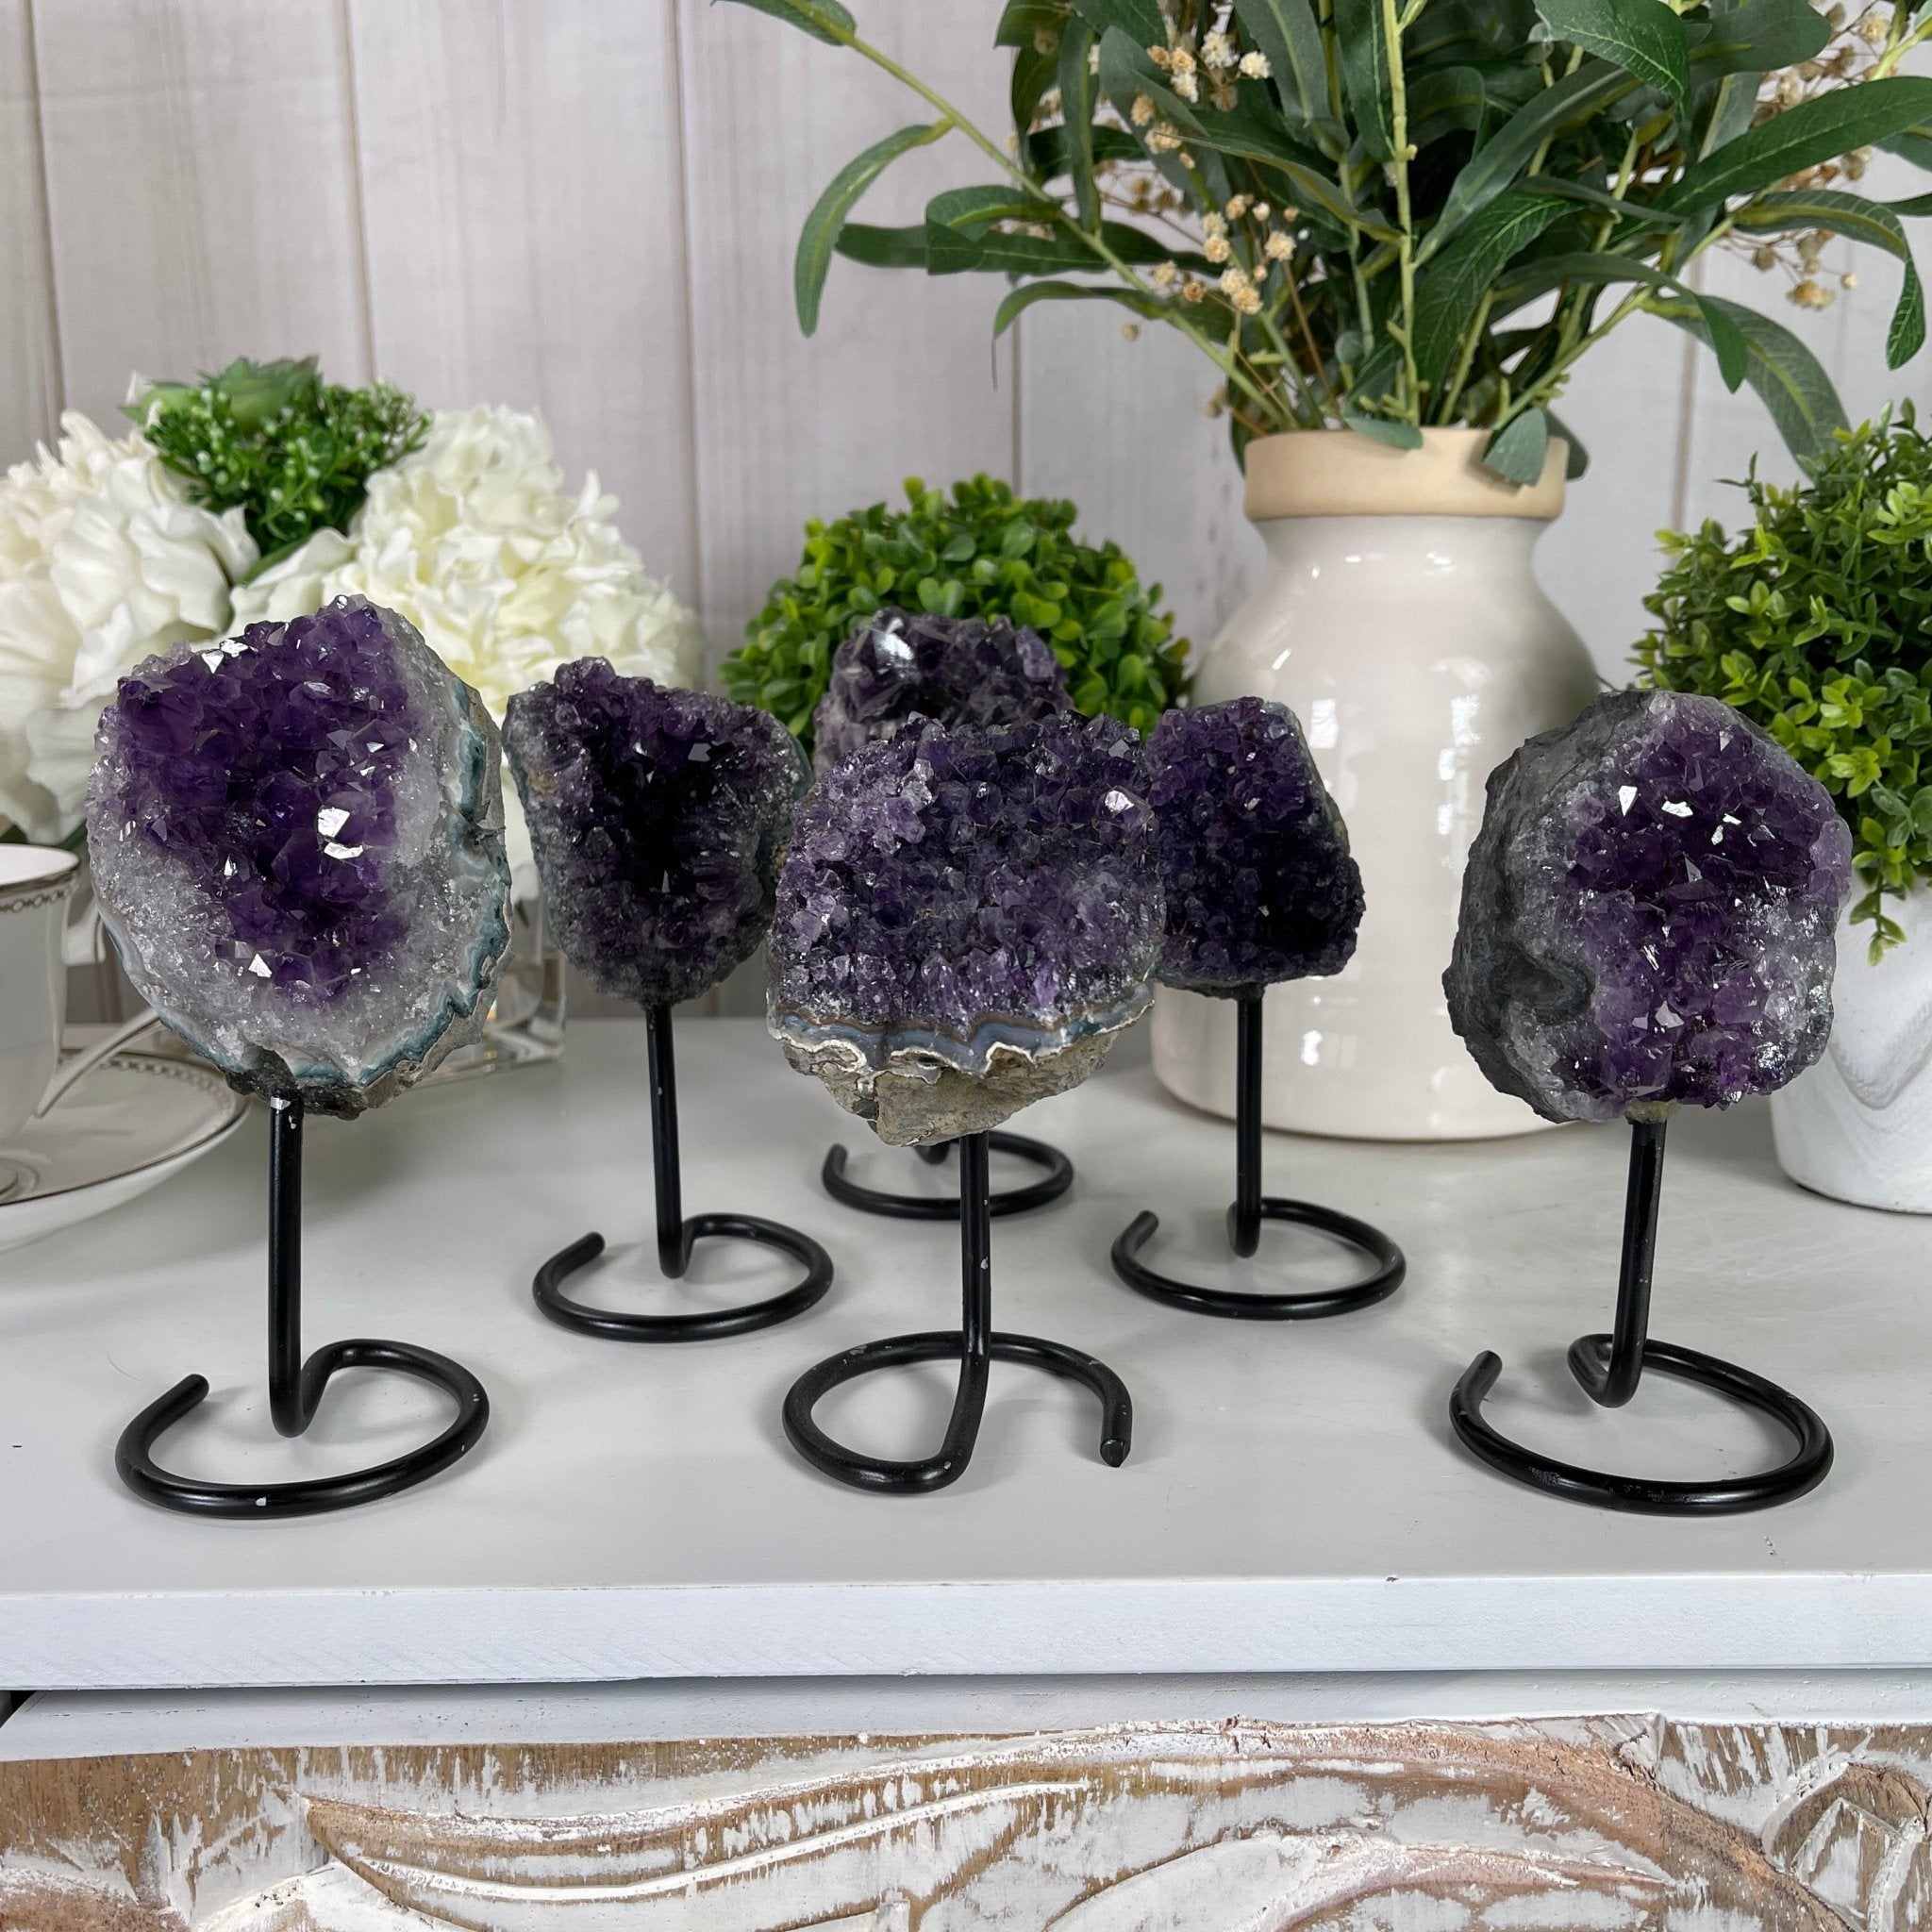 Small Amethyst Cluster on a Metal Stand, Various Options #5490 - Brazil GemsBrazil GemsSmall Amethyst Cluster on a Metal Stand, Various Options #5490Small Clusters on Metal Bases5490-0044